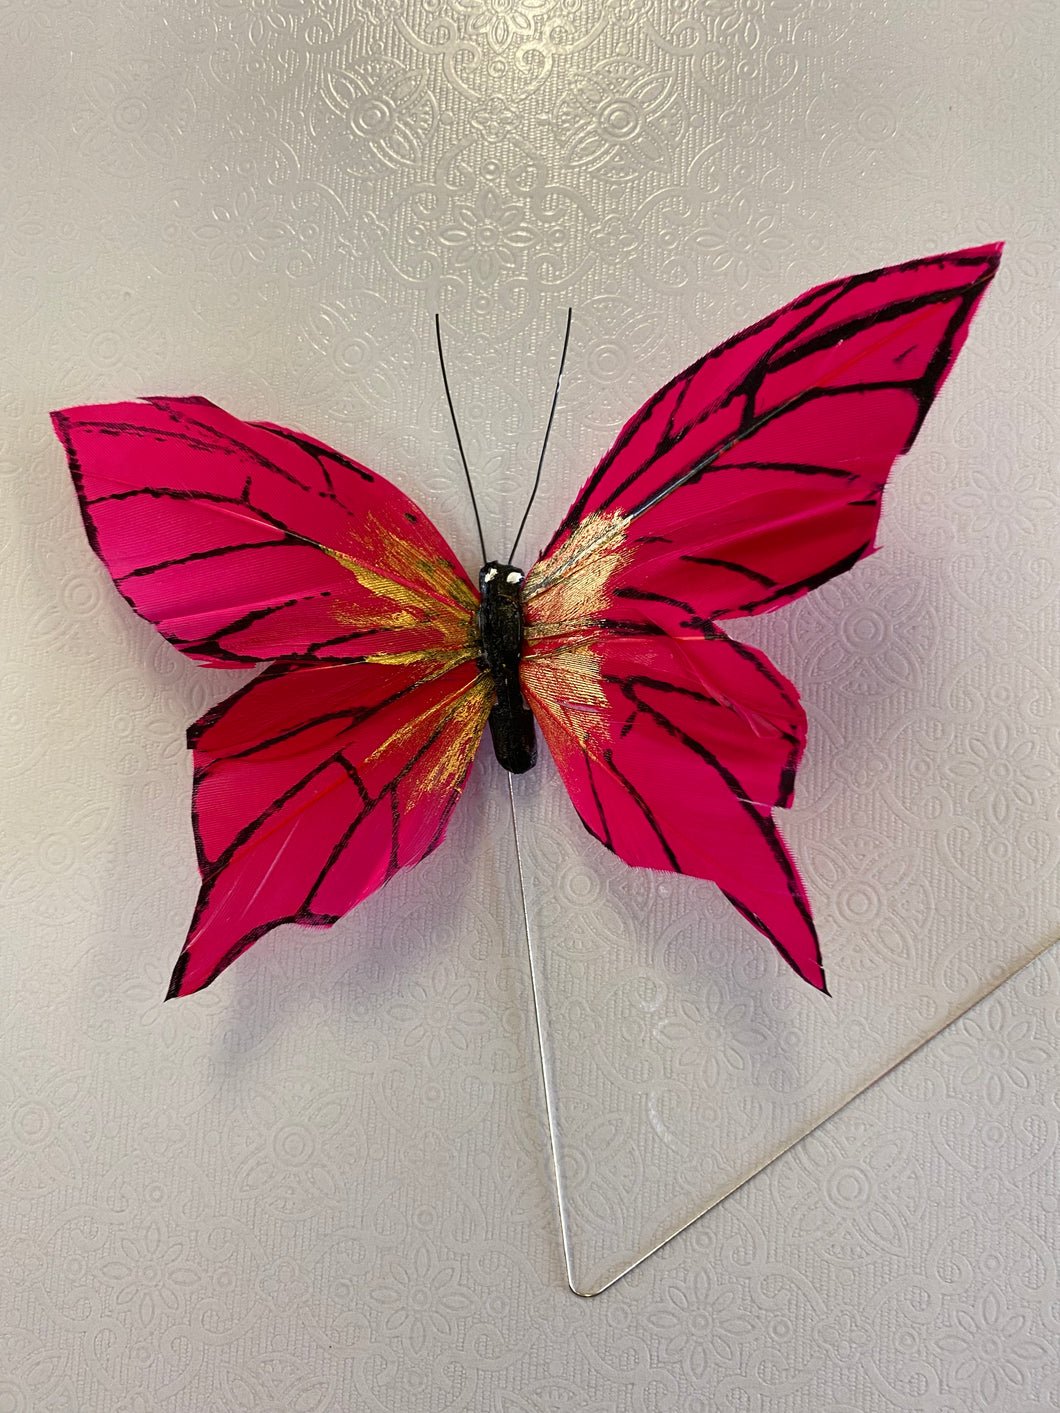 Removable Decoration - Cerise Pink Feather Butterfly